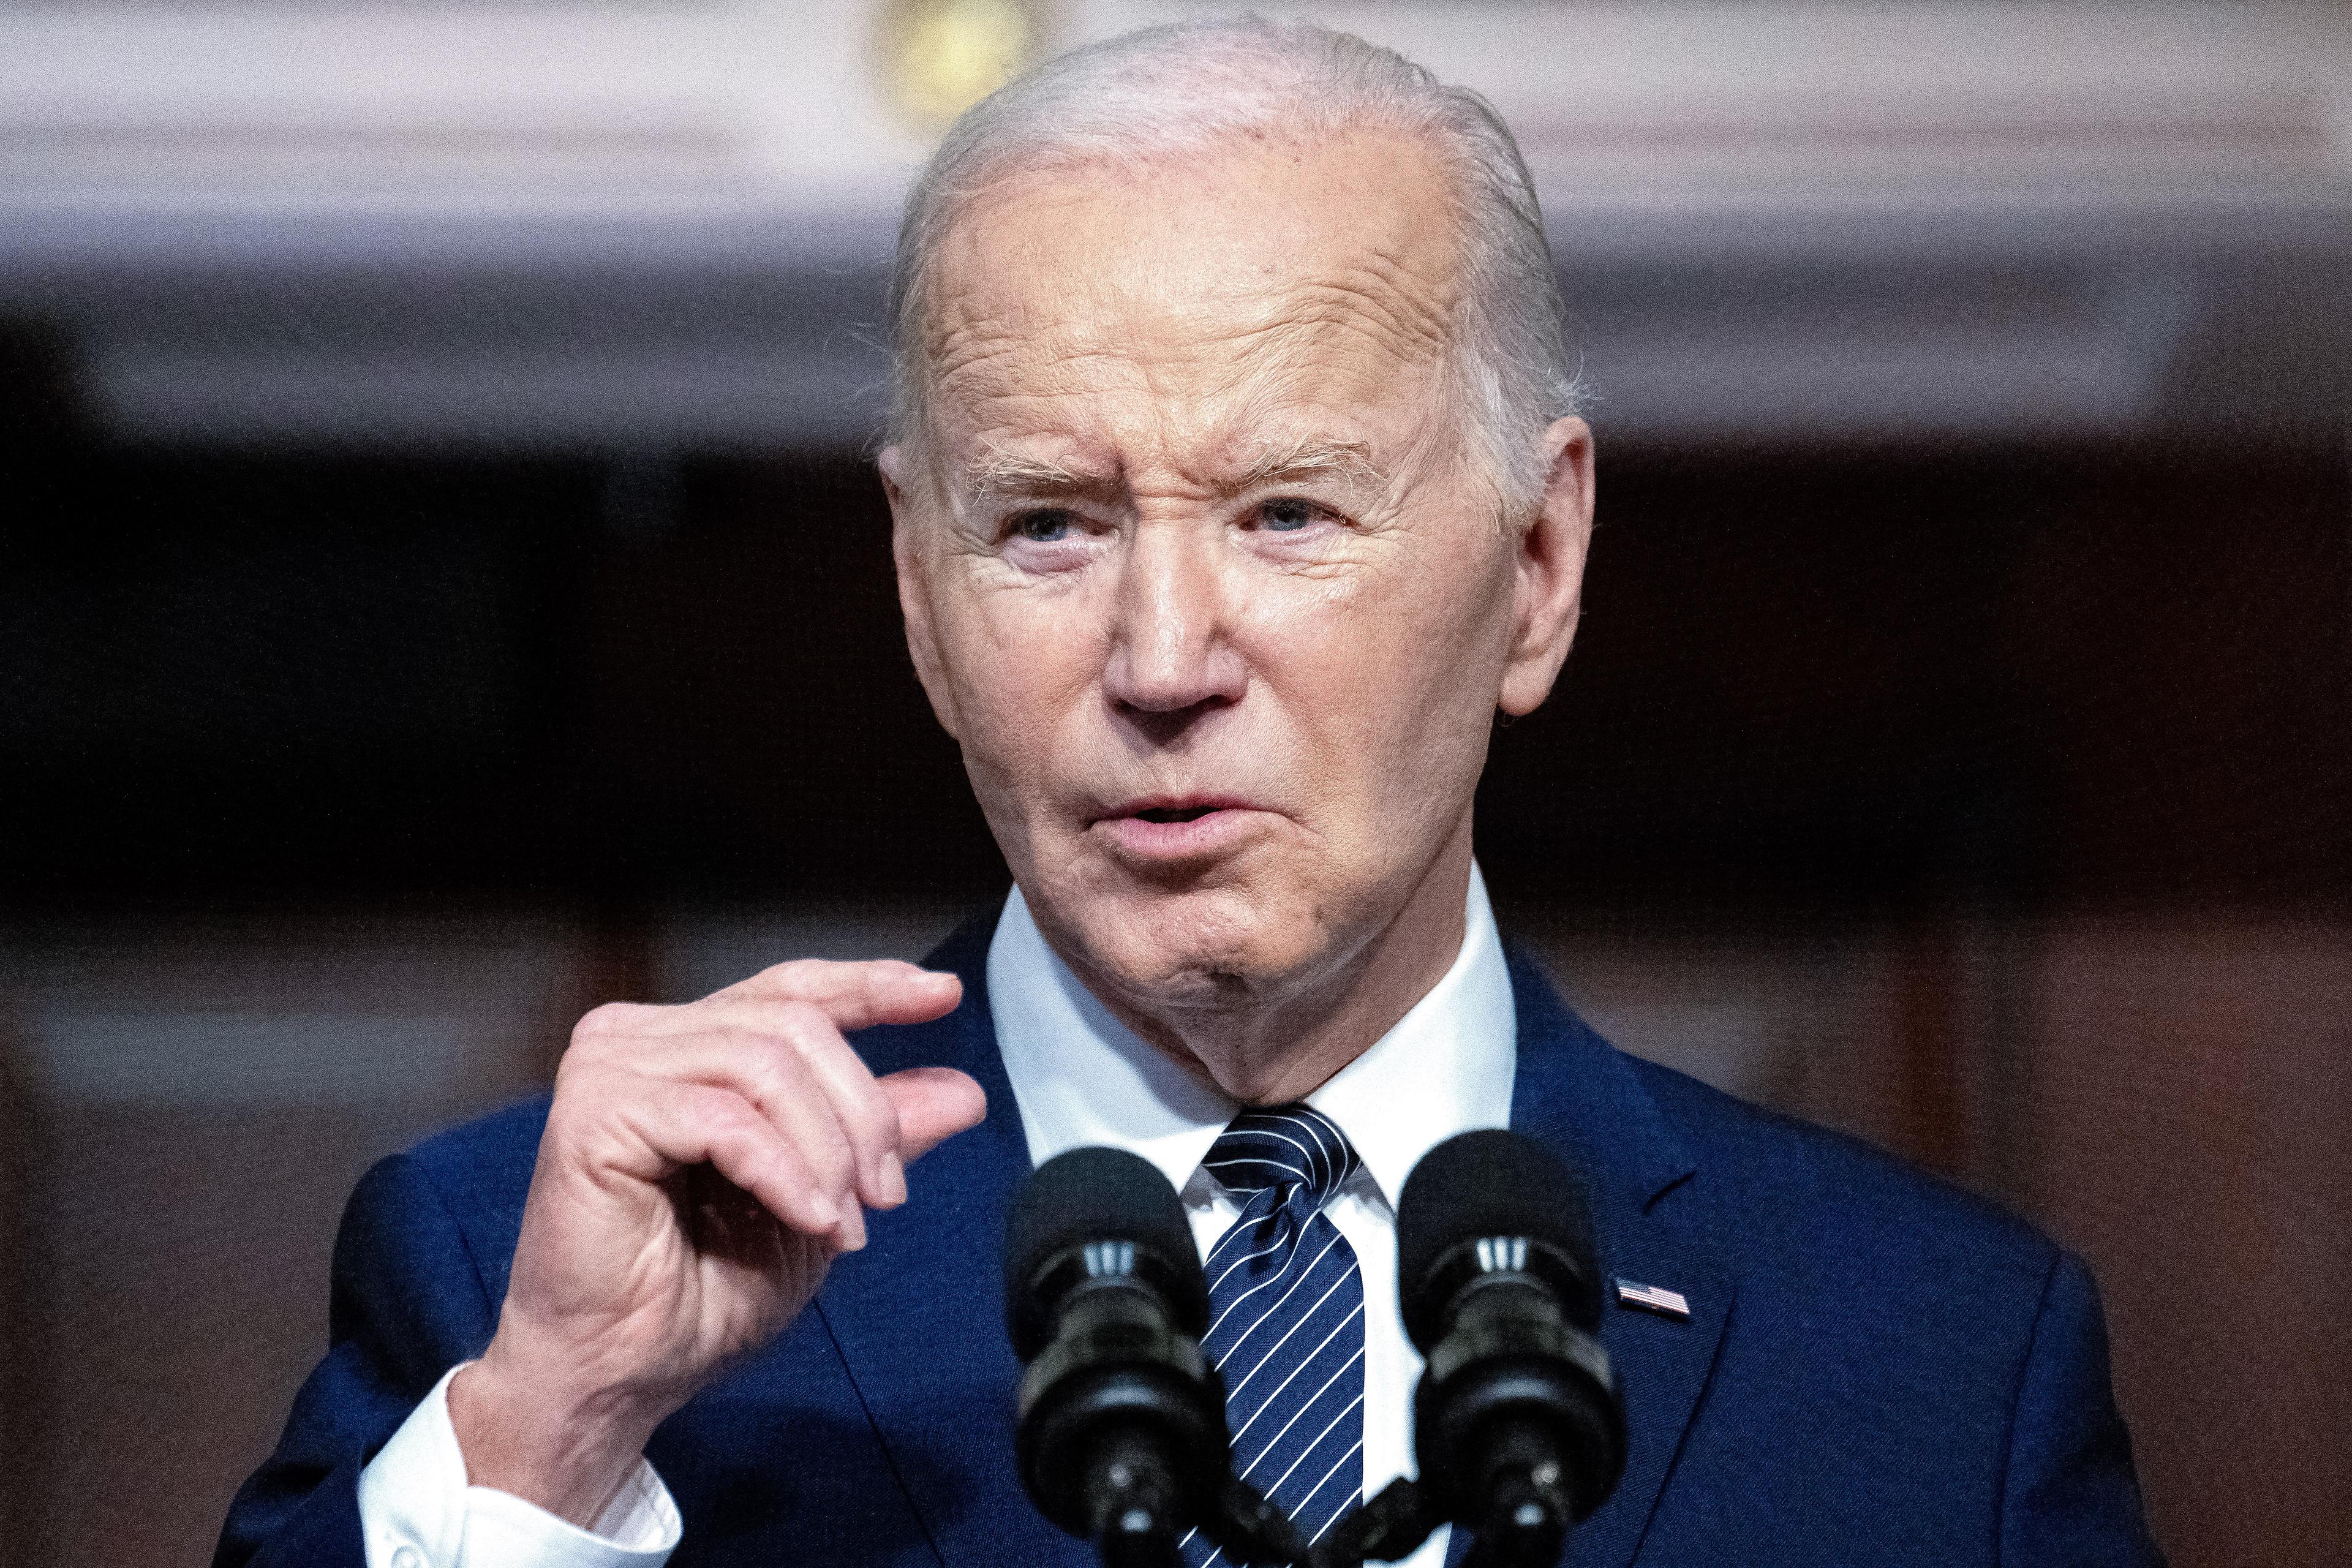 Biden to Forgive $7.4 Billion More in Student Loan Debt for 277,000 Borrowers